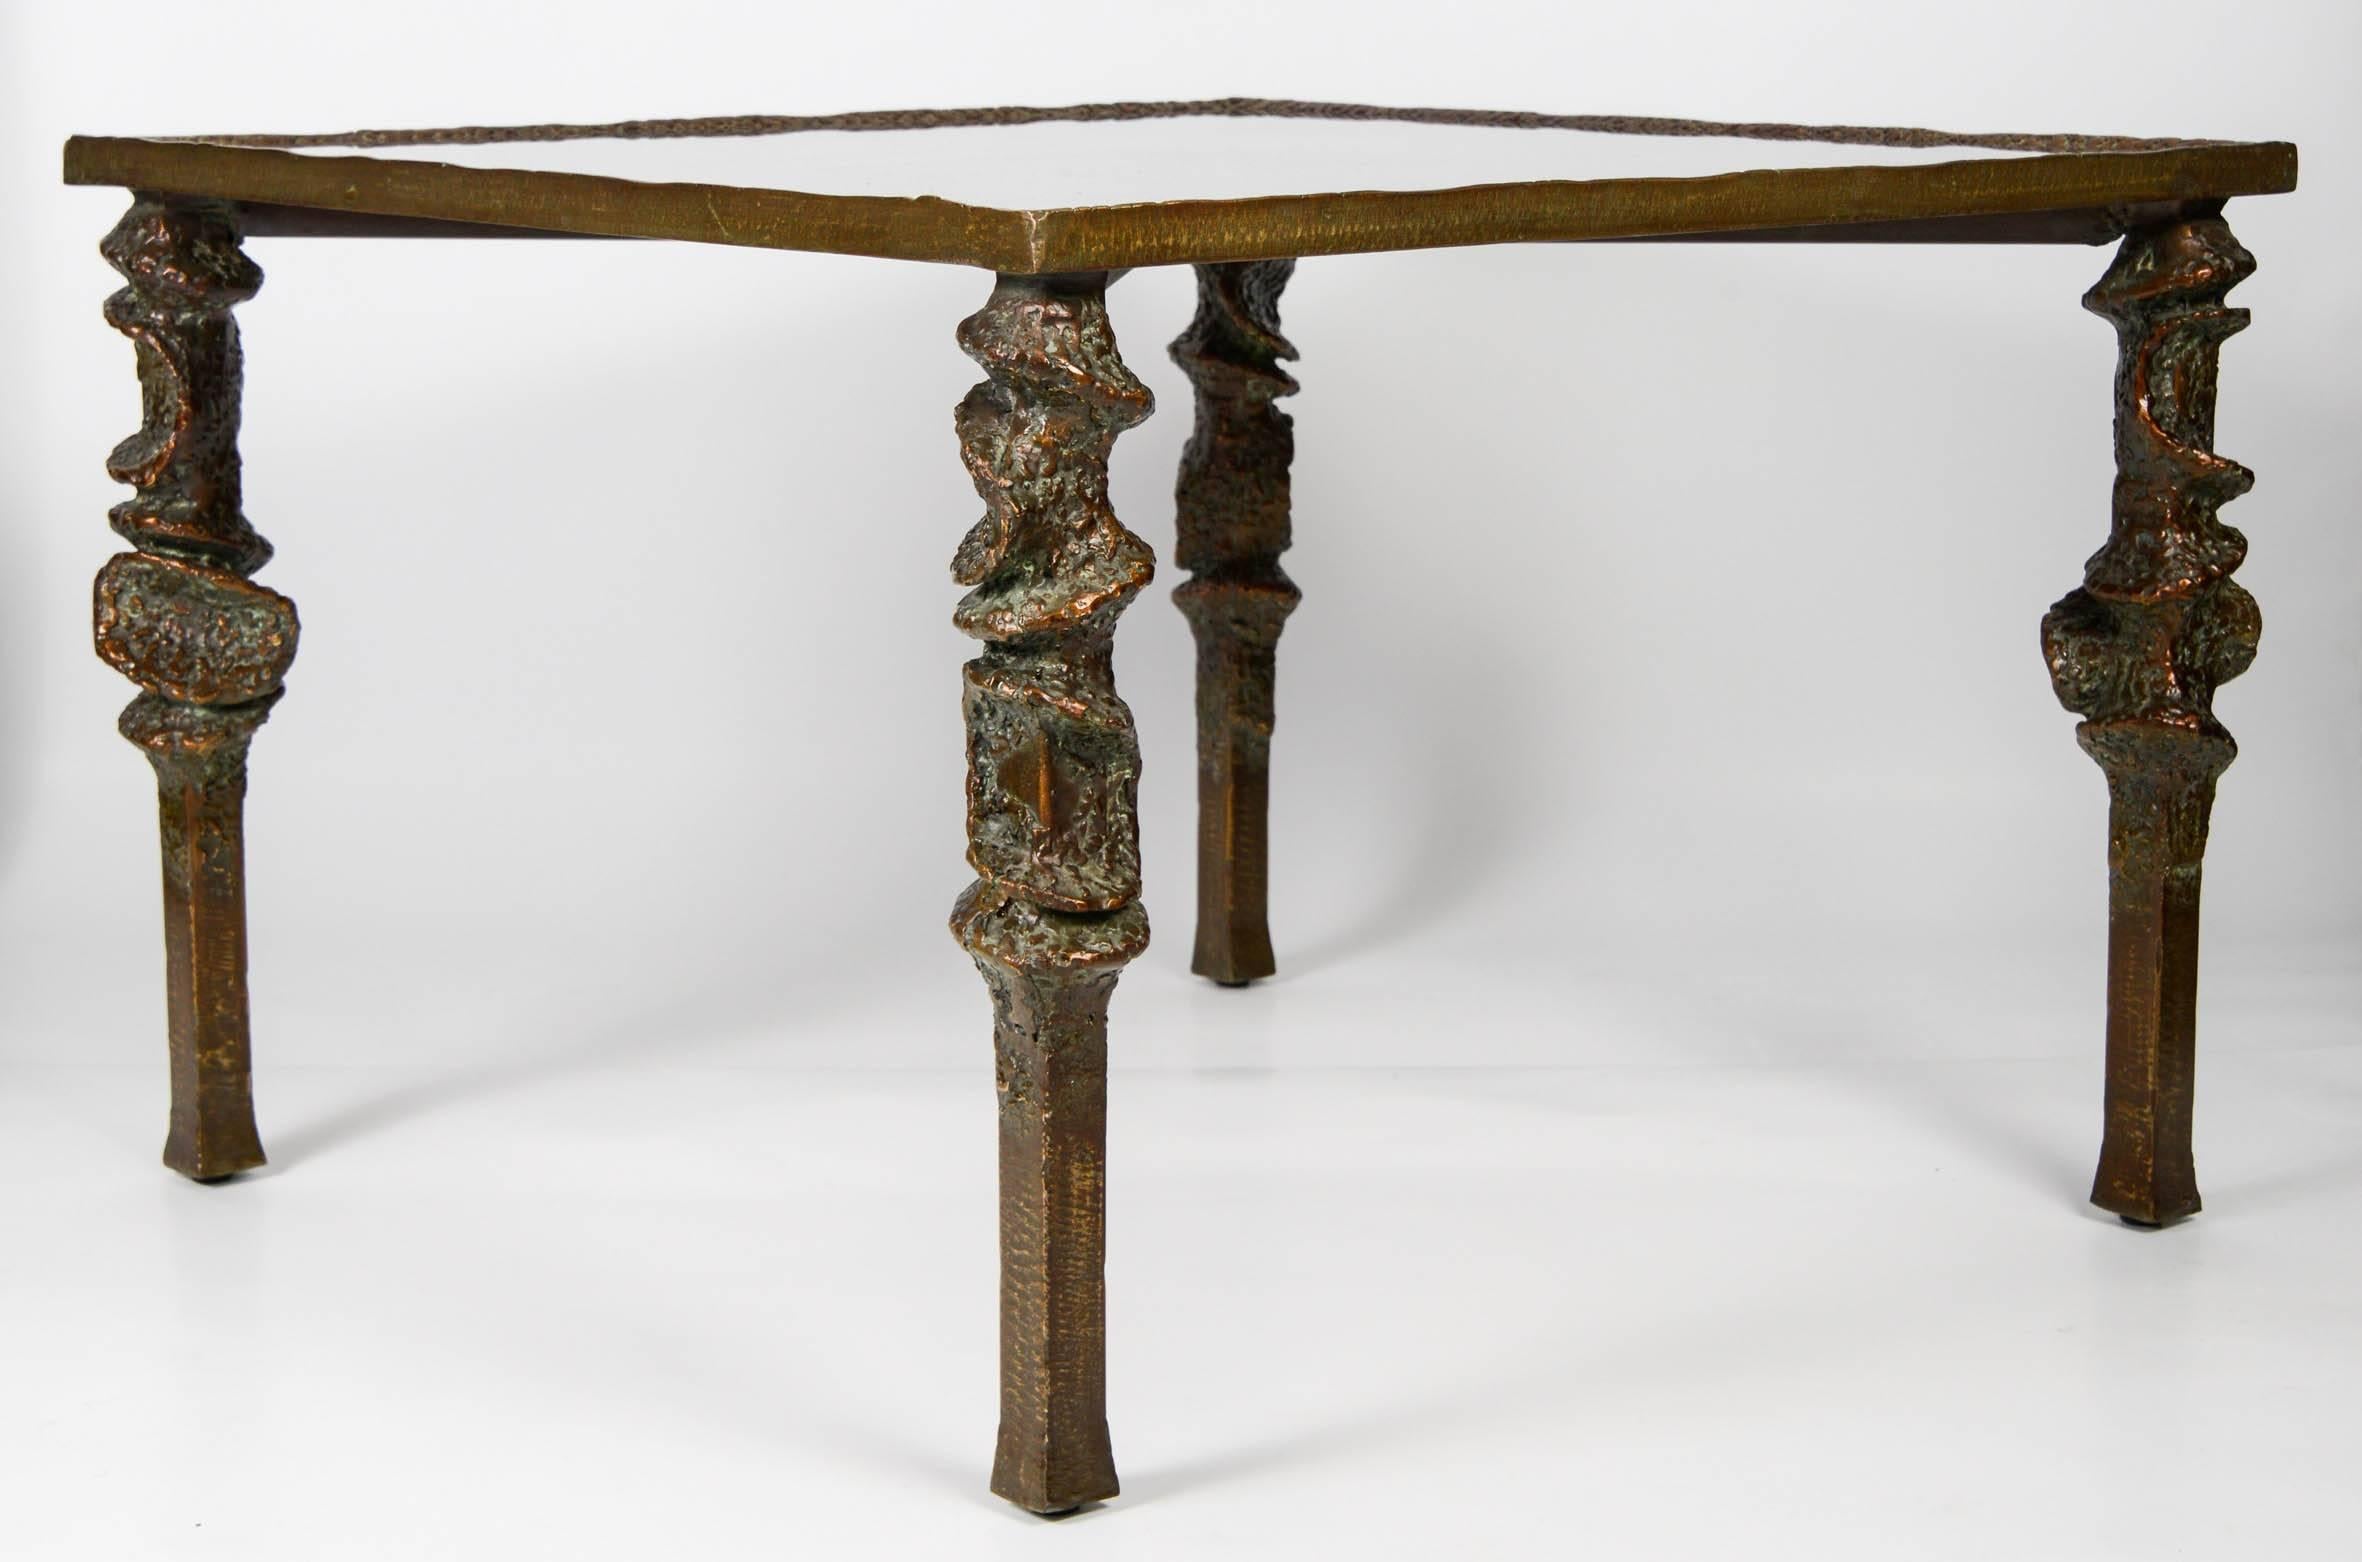 Beautiful low table, patinated metal and glass.